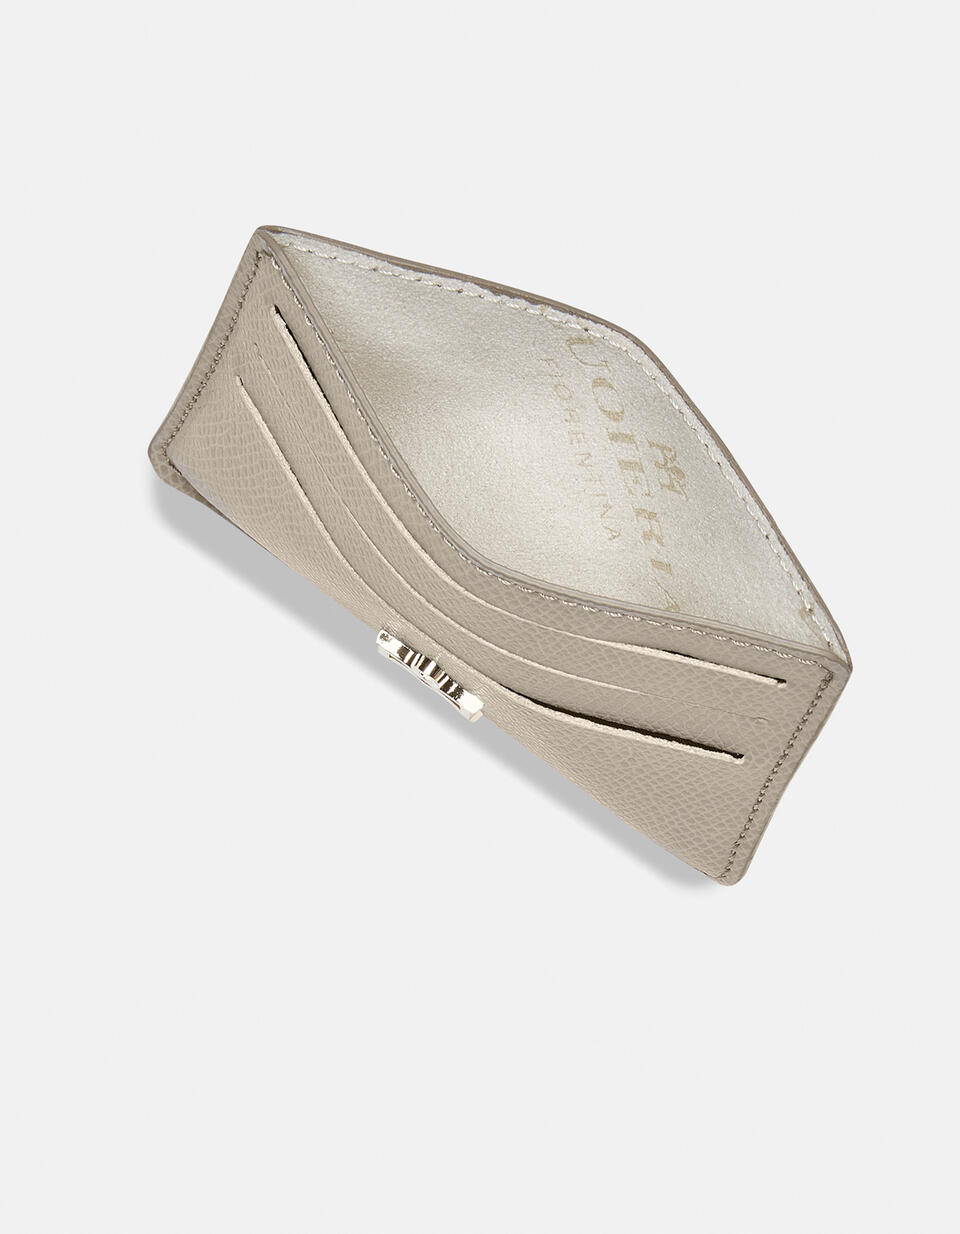 Bella credit car holder with space for banknotes - Card Holders - Women's Wallets | Wallets TAUPE CHIARO - Card Holders - Women's Wallets | WalletsCuoieria Fiorentina